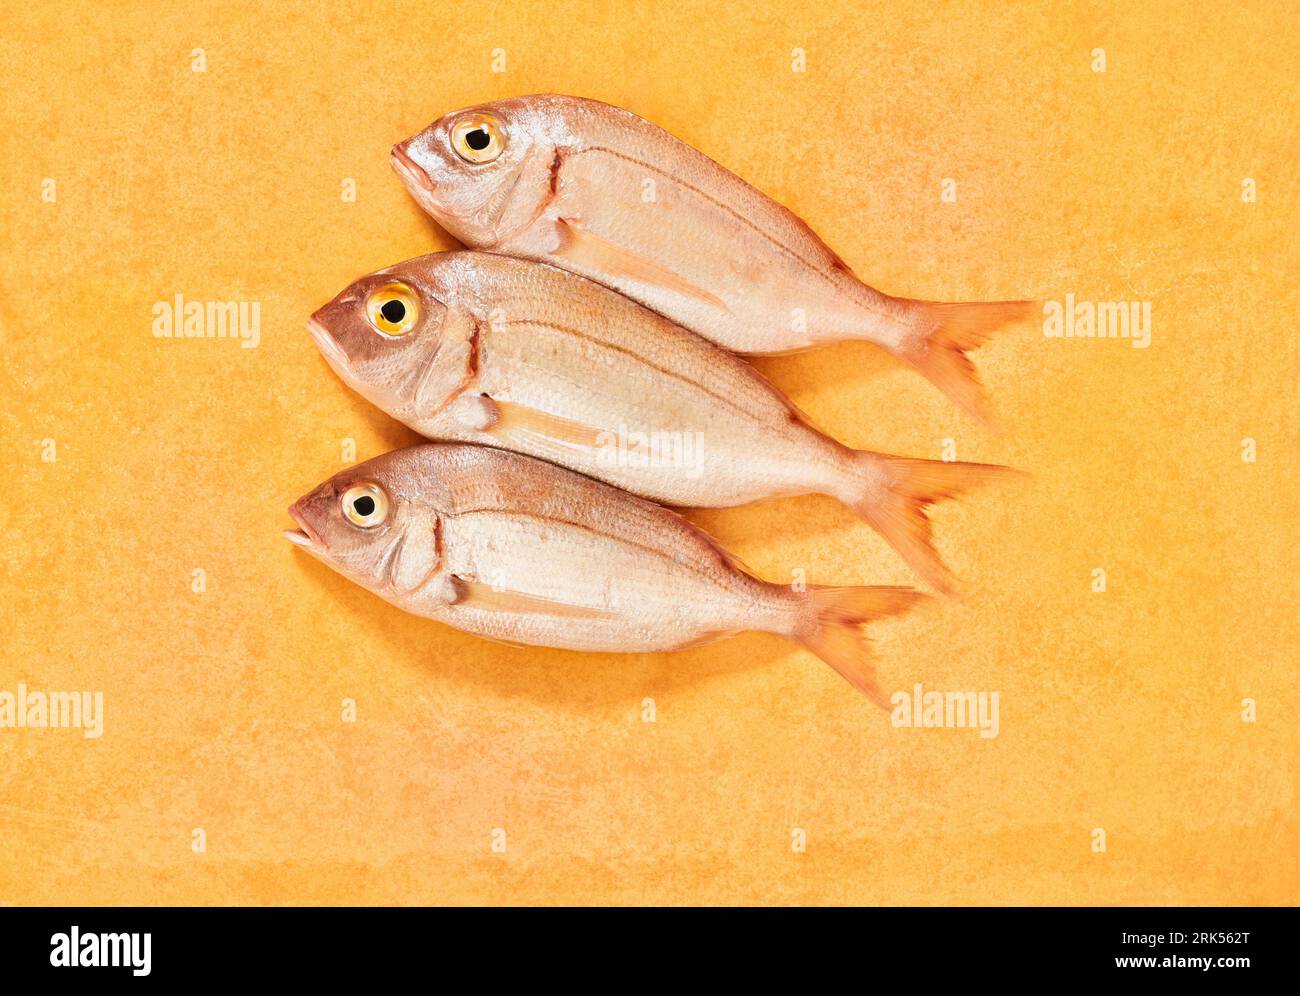 A top view of raw common pandora fish on an orange background Stock Photo